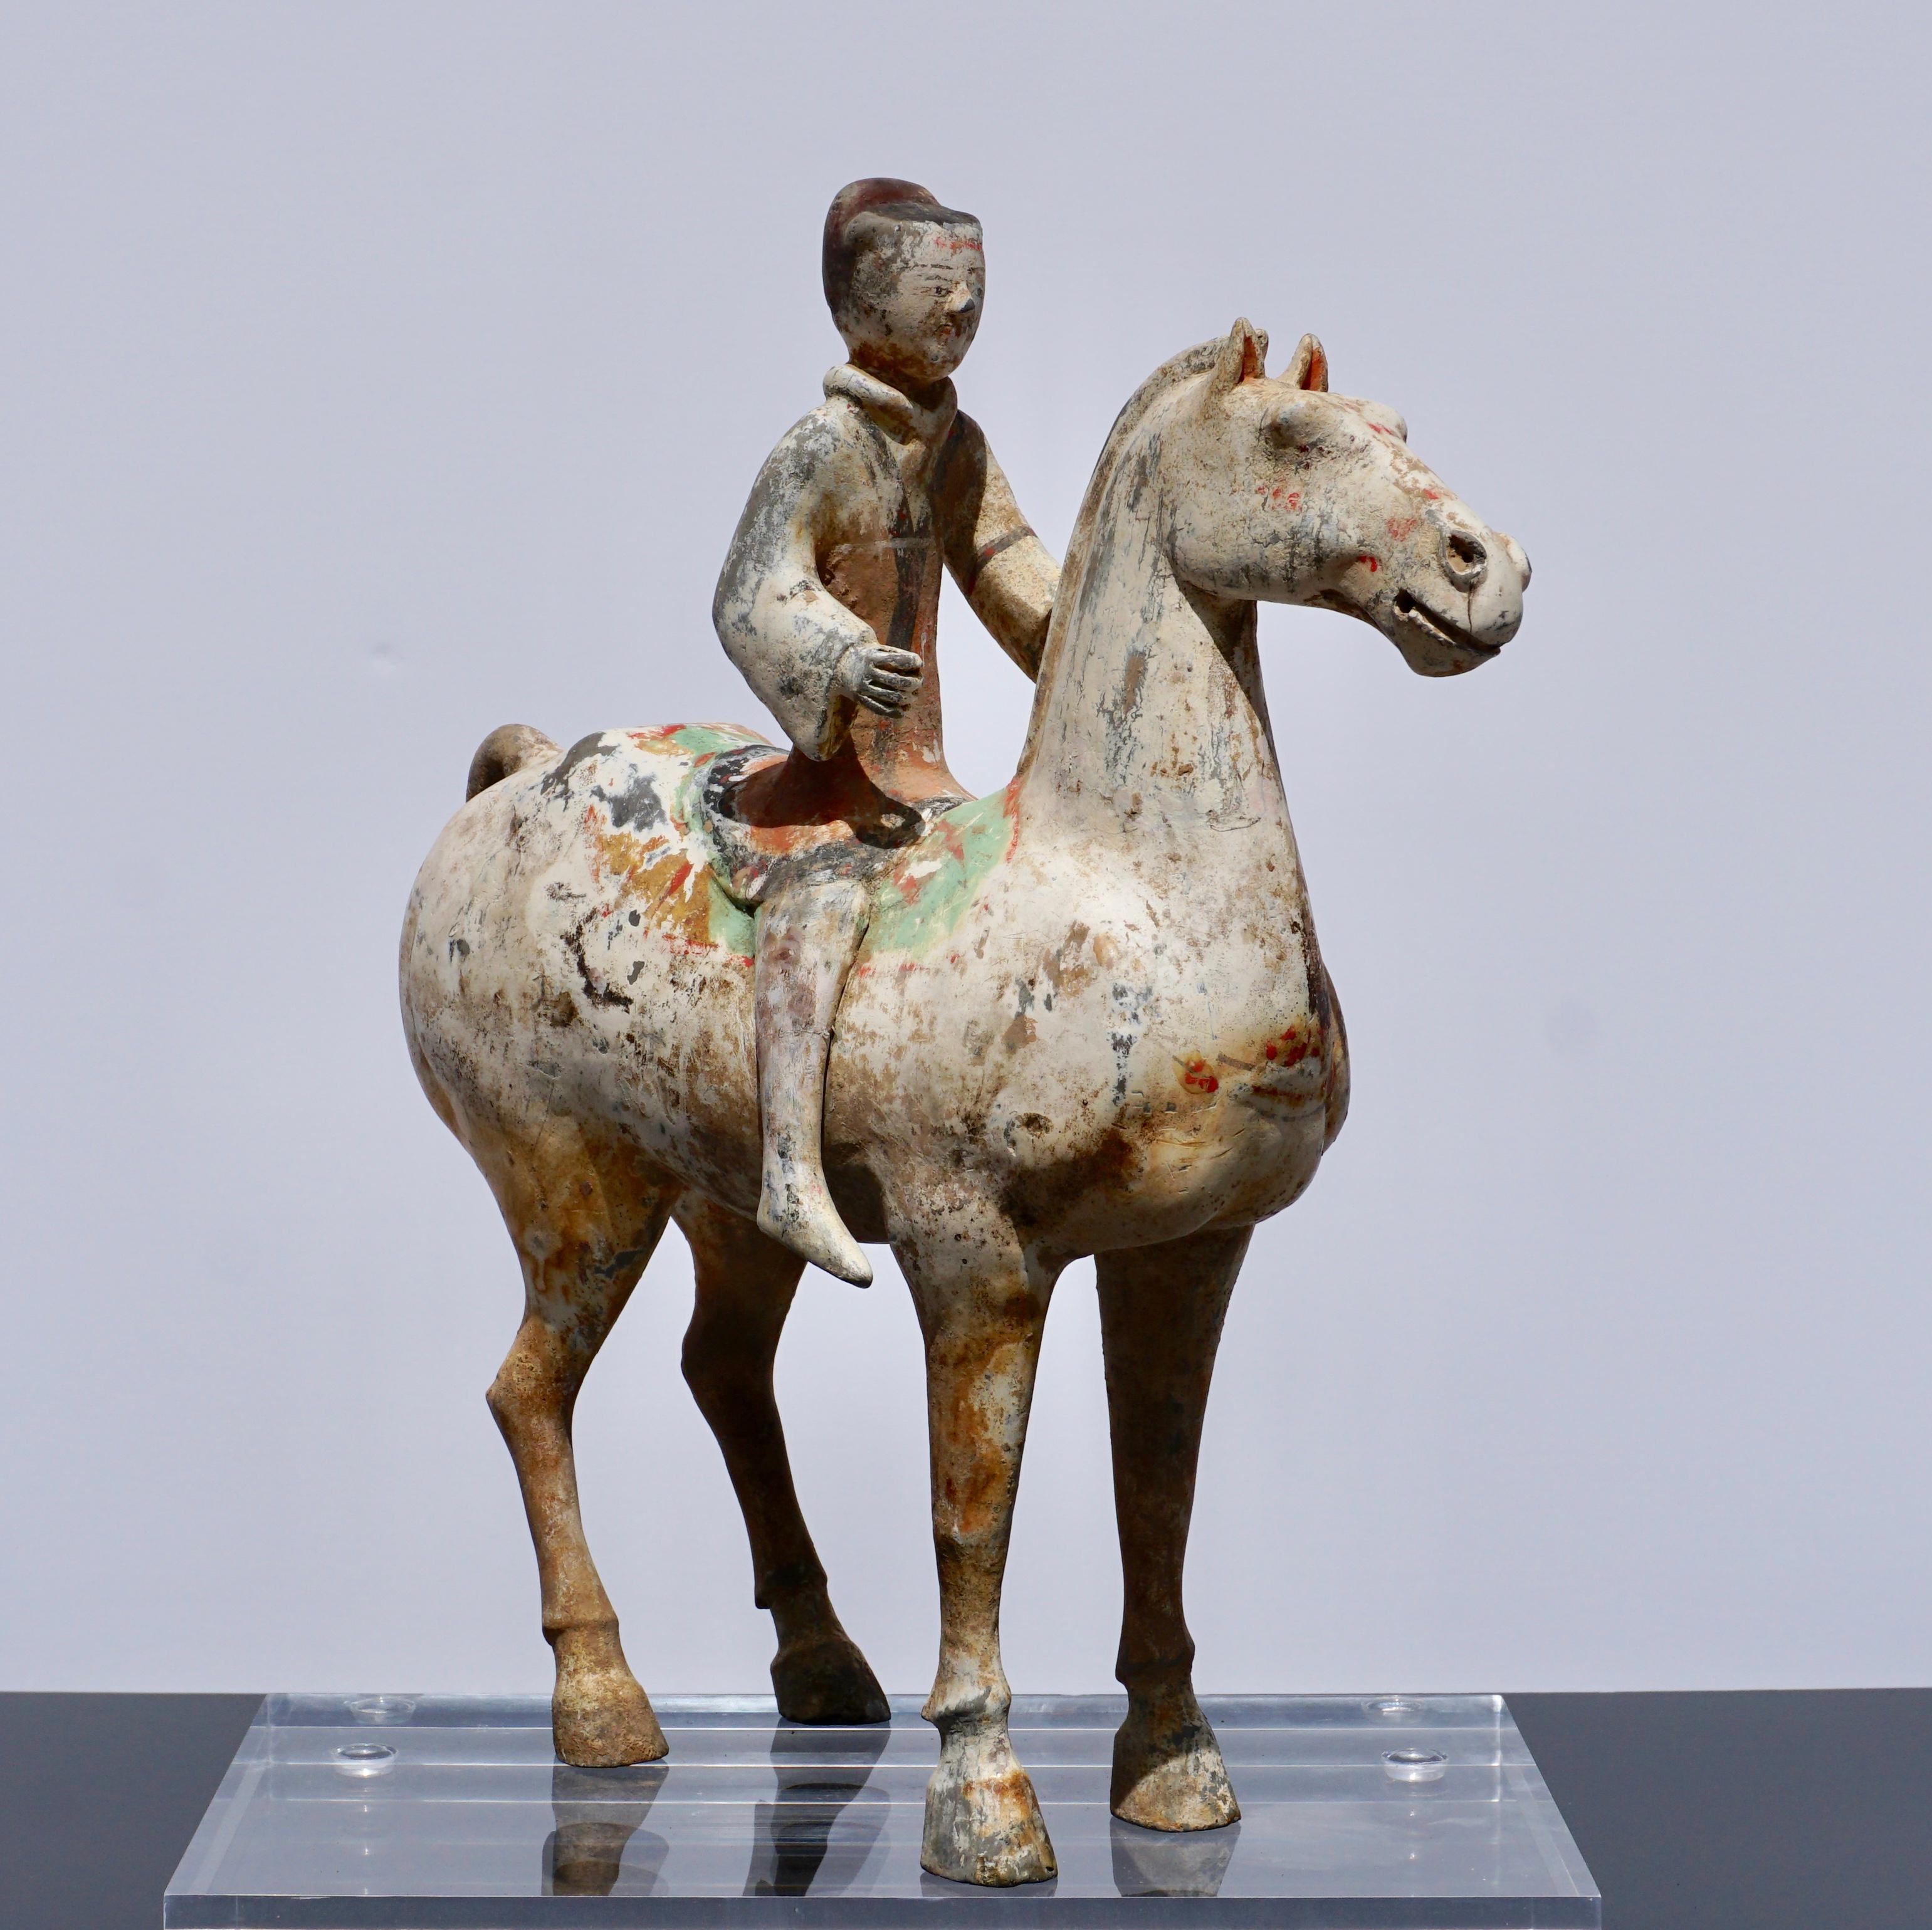 Chinese Han Dynasty Horse and Rider Terracotta, 206 BC-220 AD